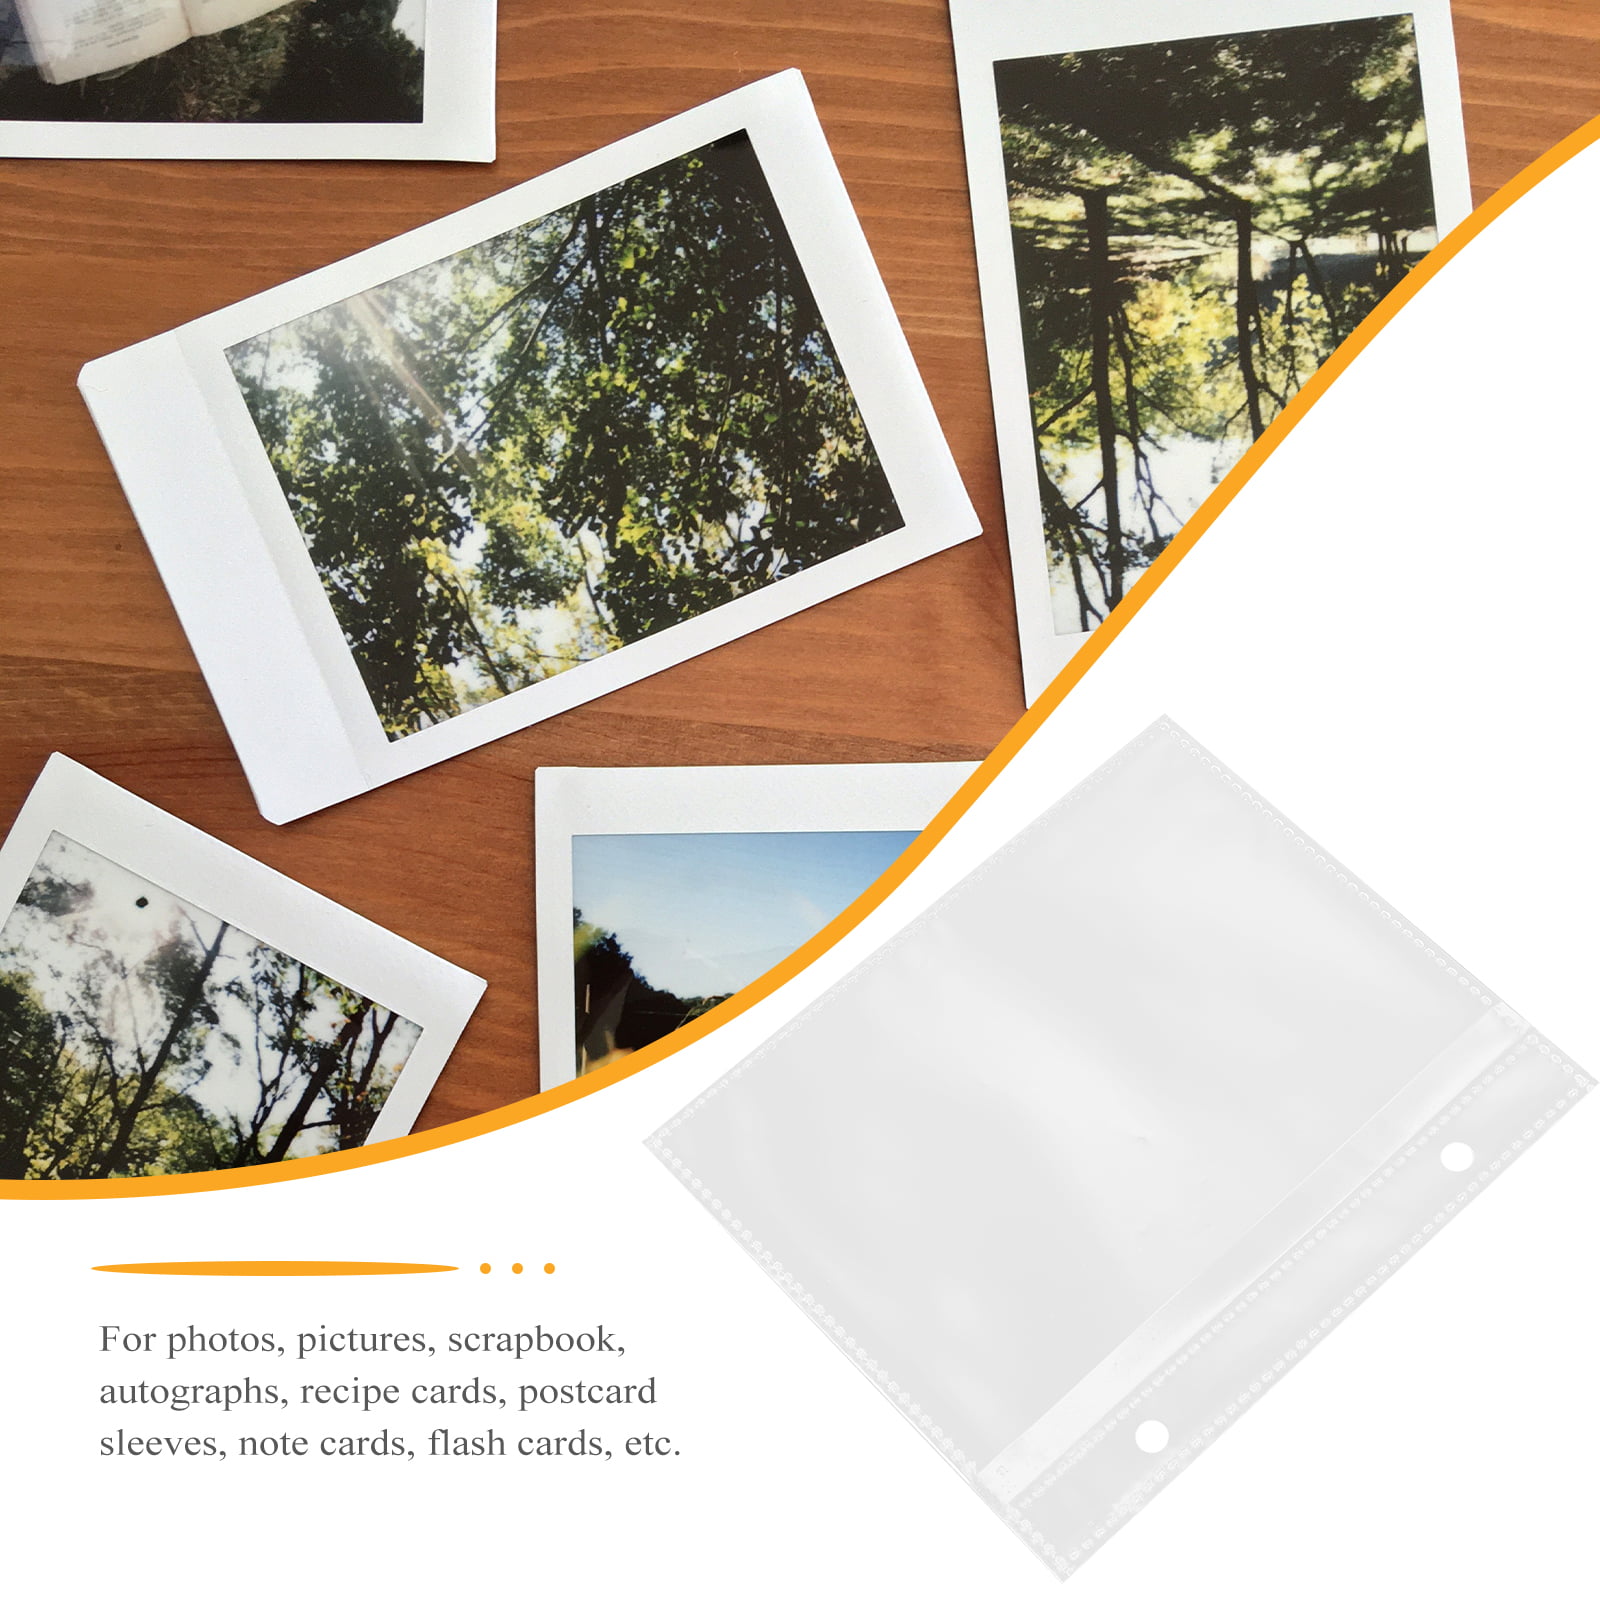 50 Sheets Clear Photo Sleeves Photo Album Page Blinder Photo Sleeves Postcard  Sleeves 